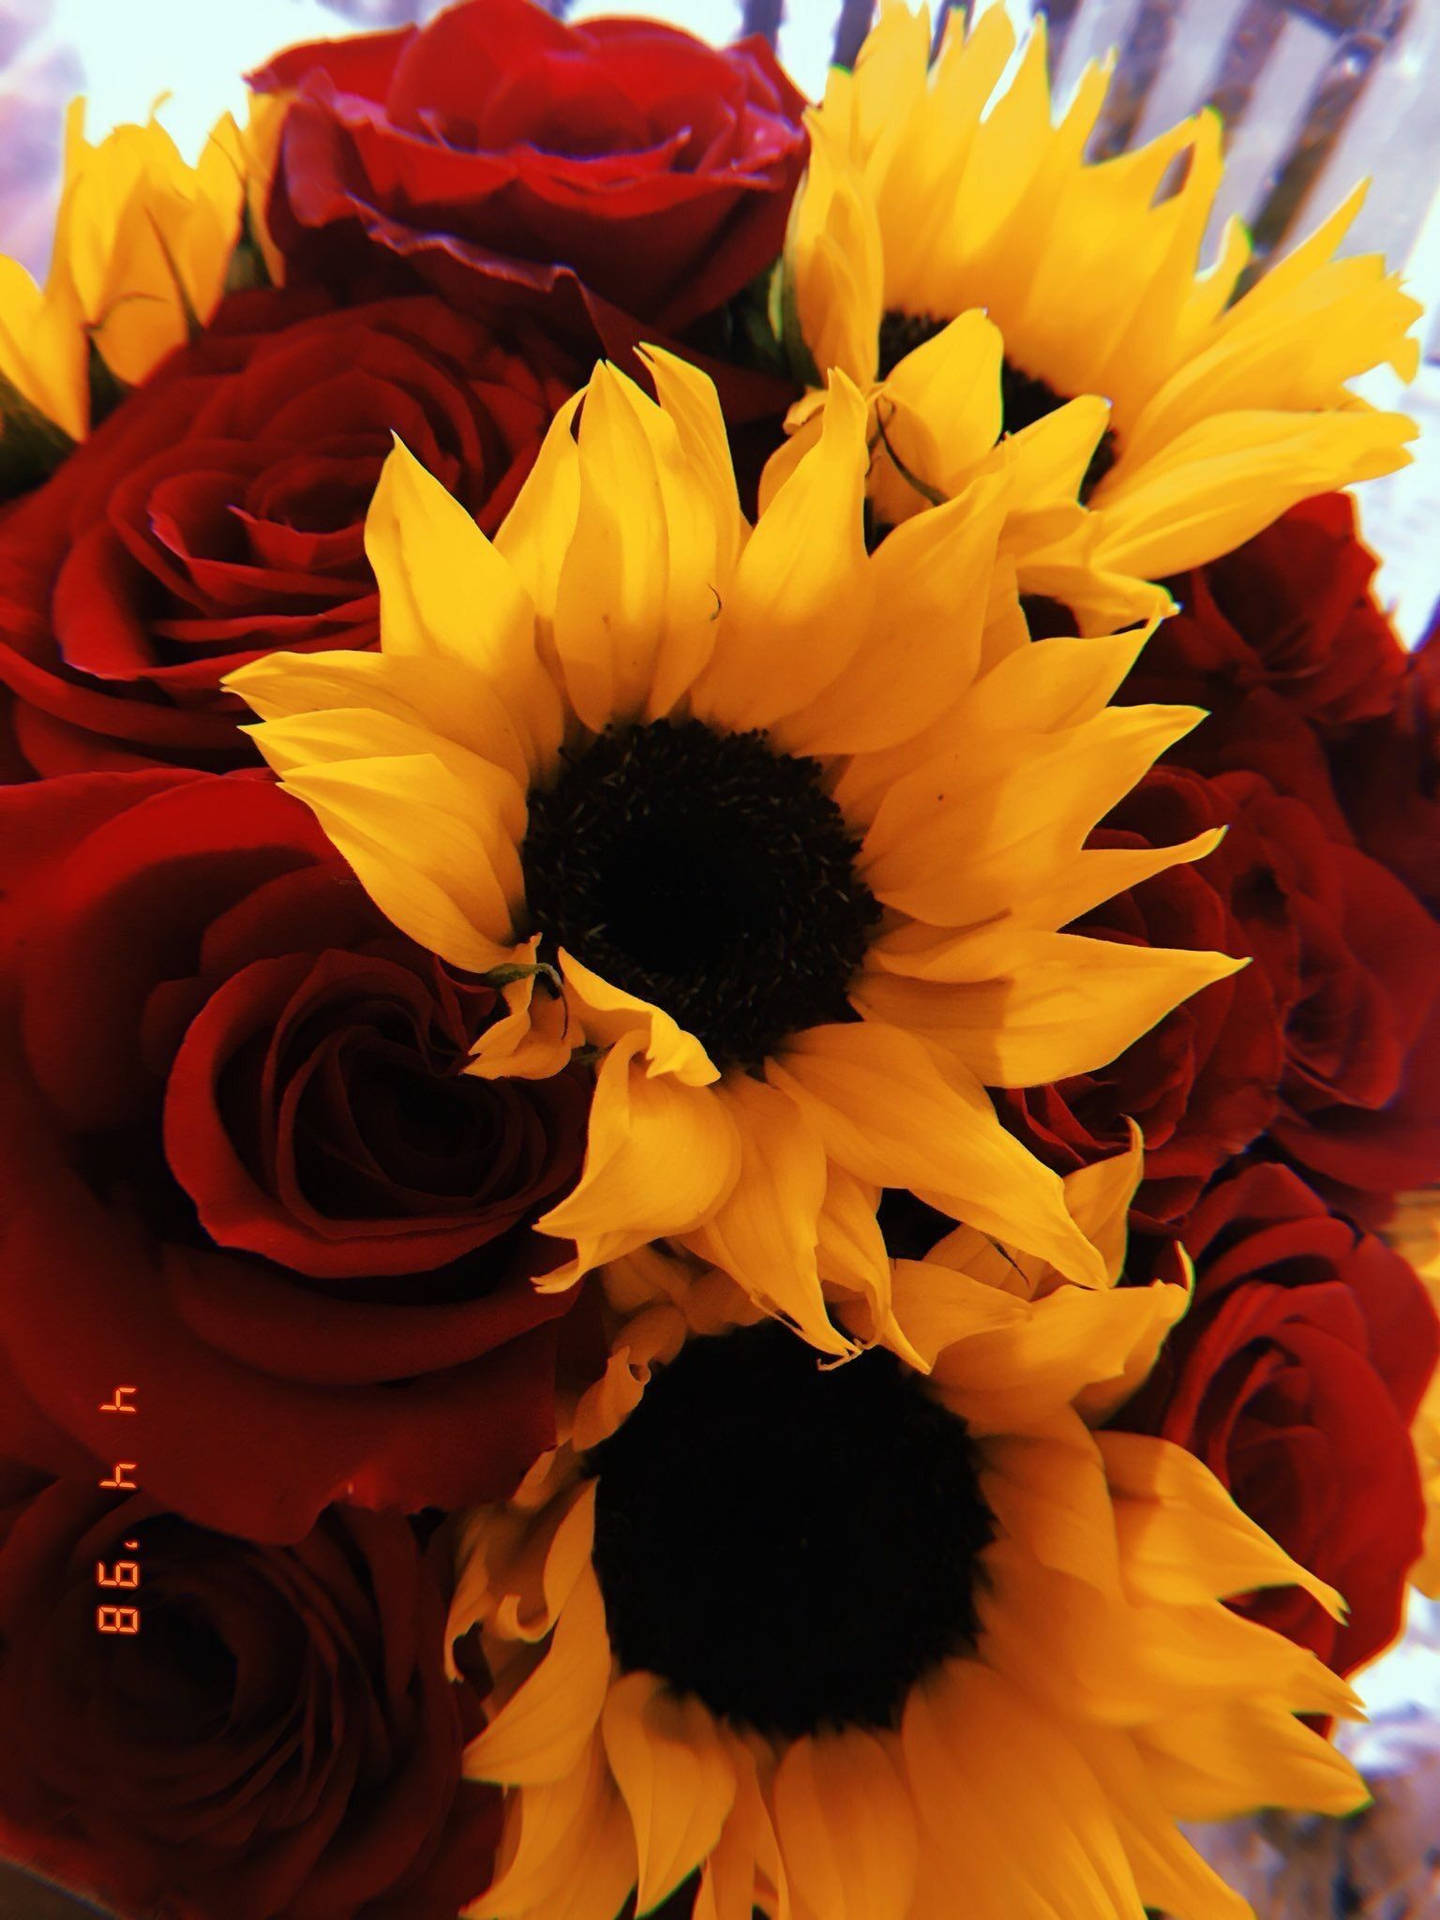 Sunflower And Roses Vibrant Flower Bouquet Background